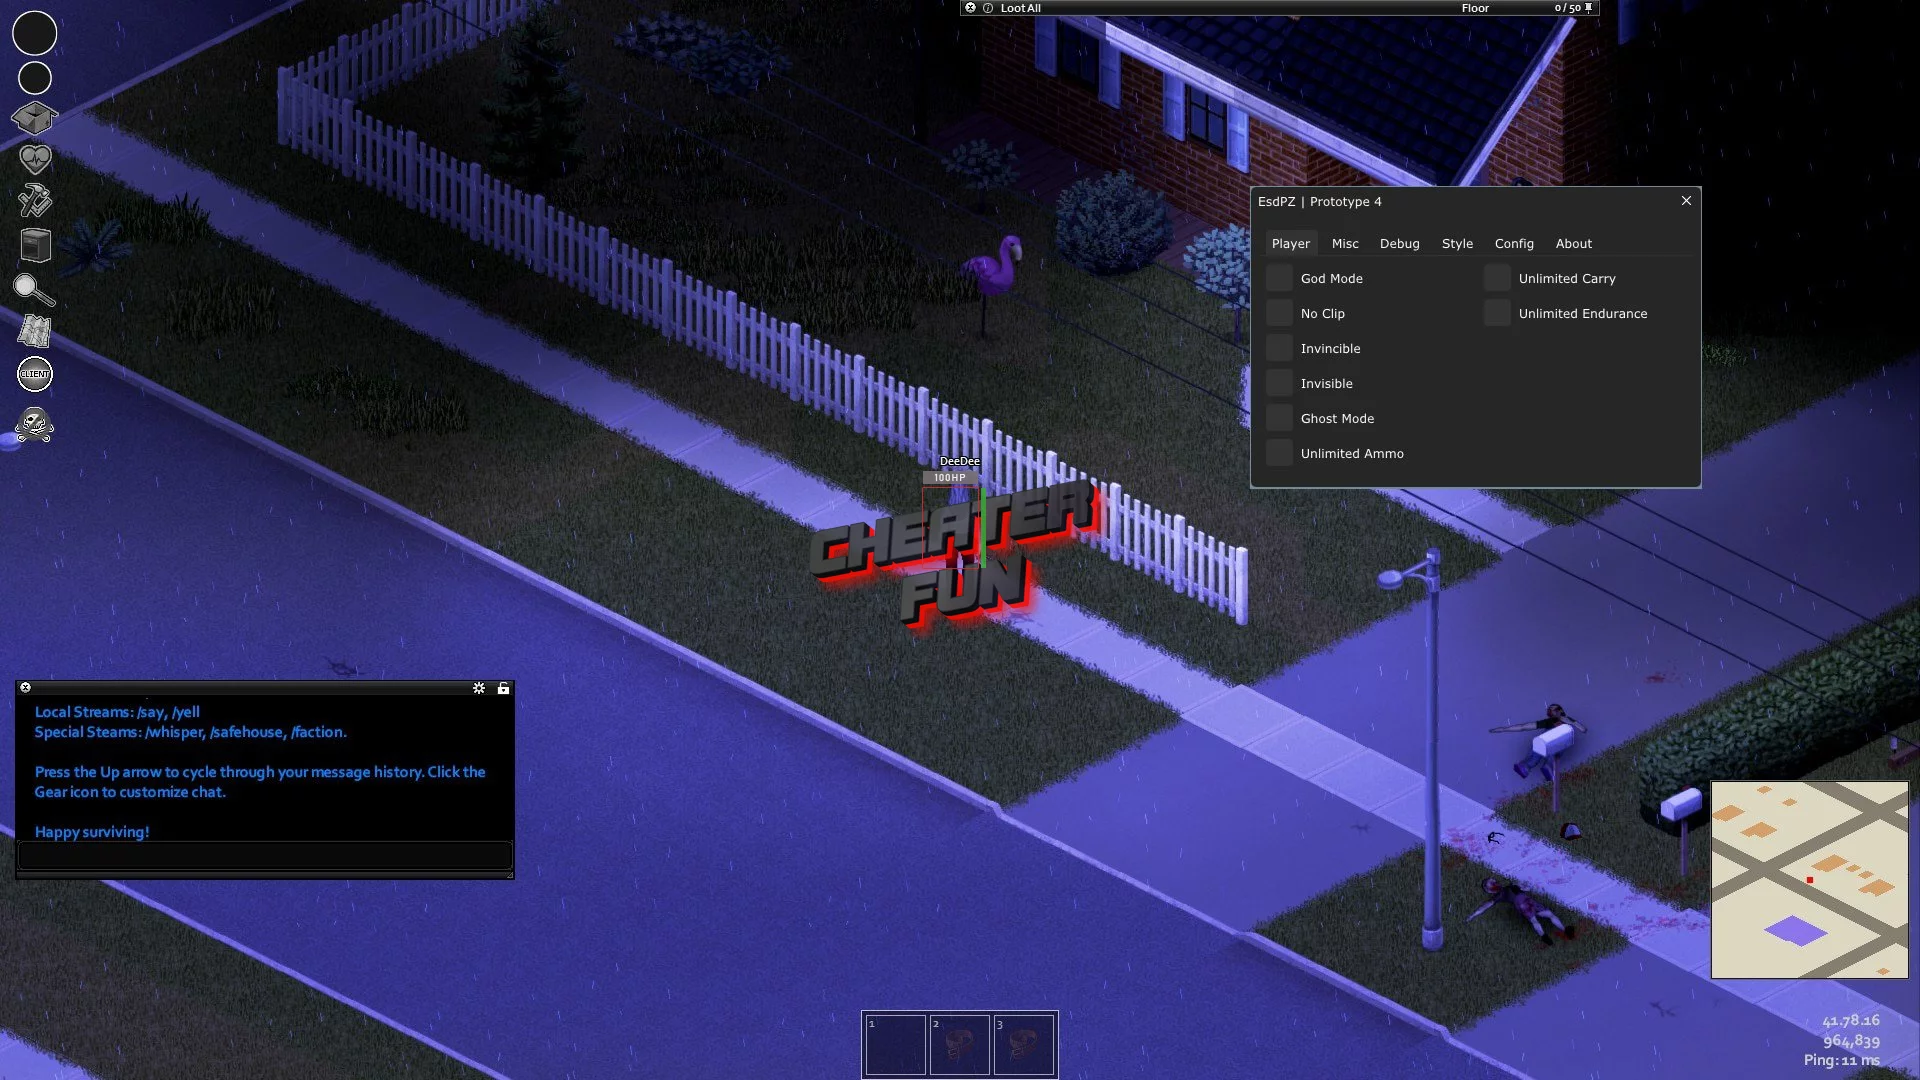 Project Zomboid Cheat PC: God Mode, NoClip, Ghost Mode